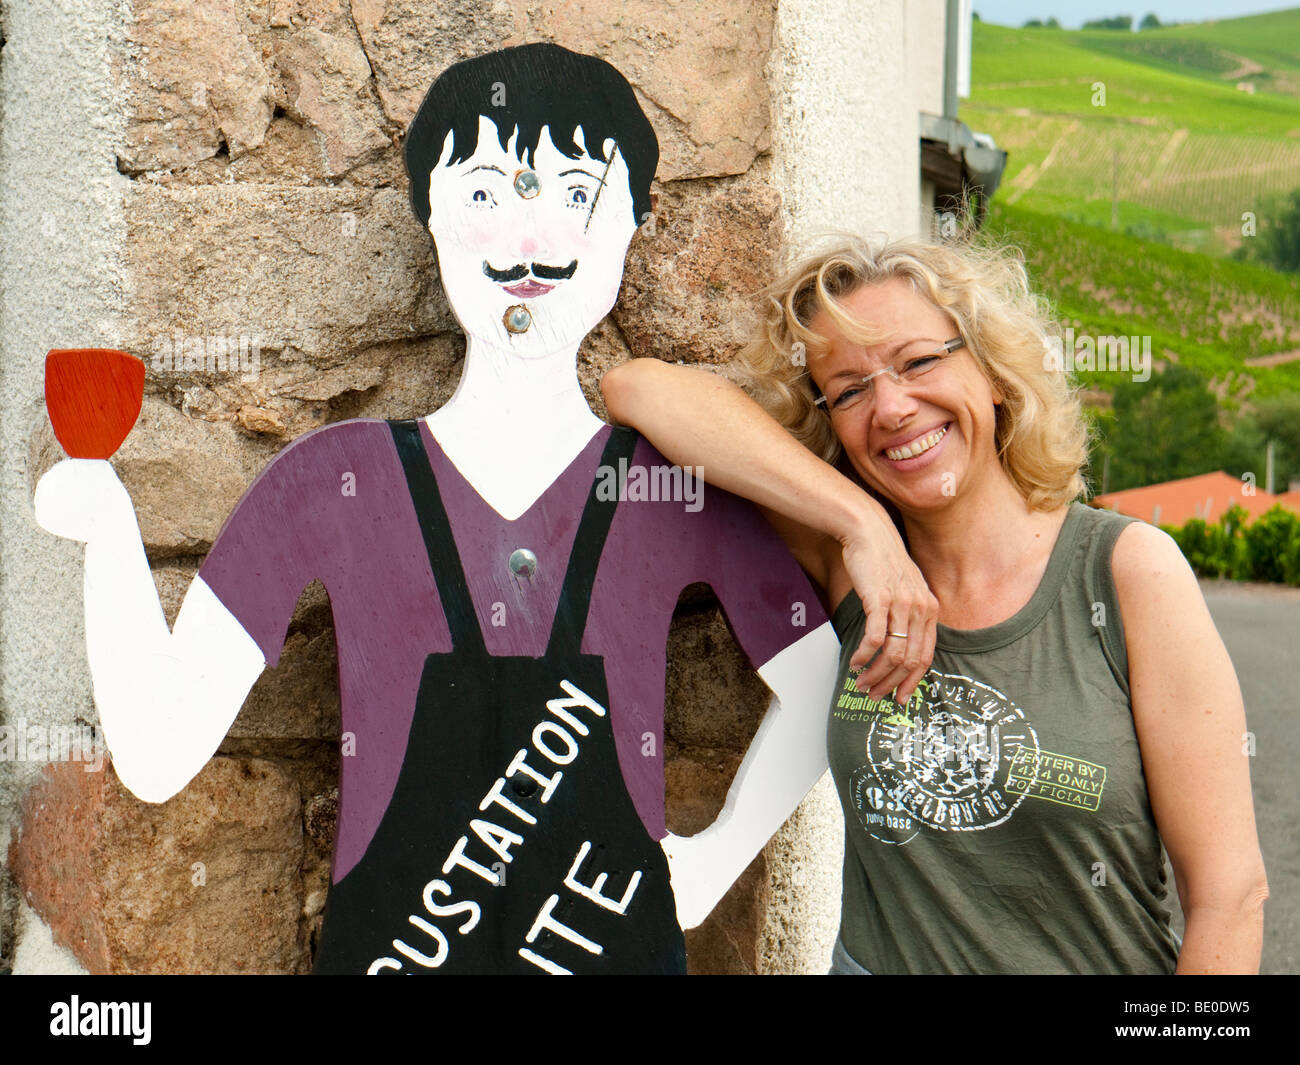 A tourist leans on a wooden figure which resembles a vintner and advertises the renowned Beaujolais wine of Fleurie. Stock Photo